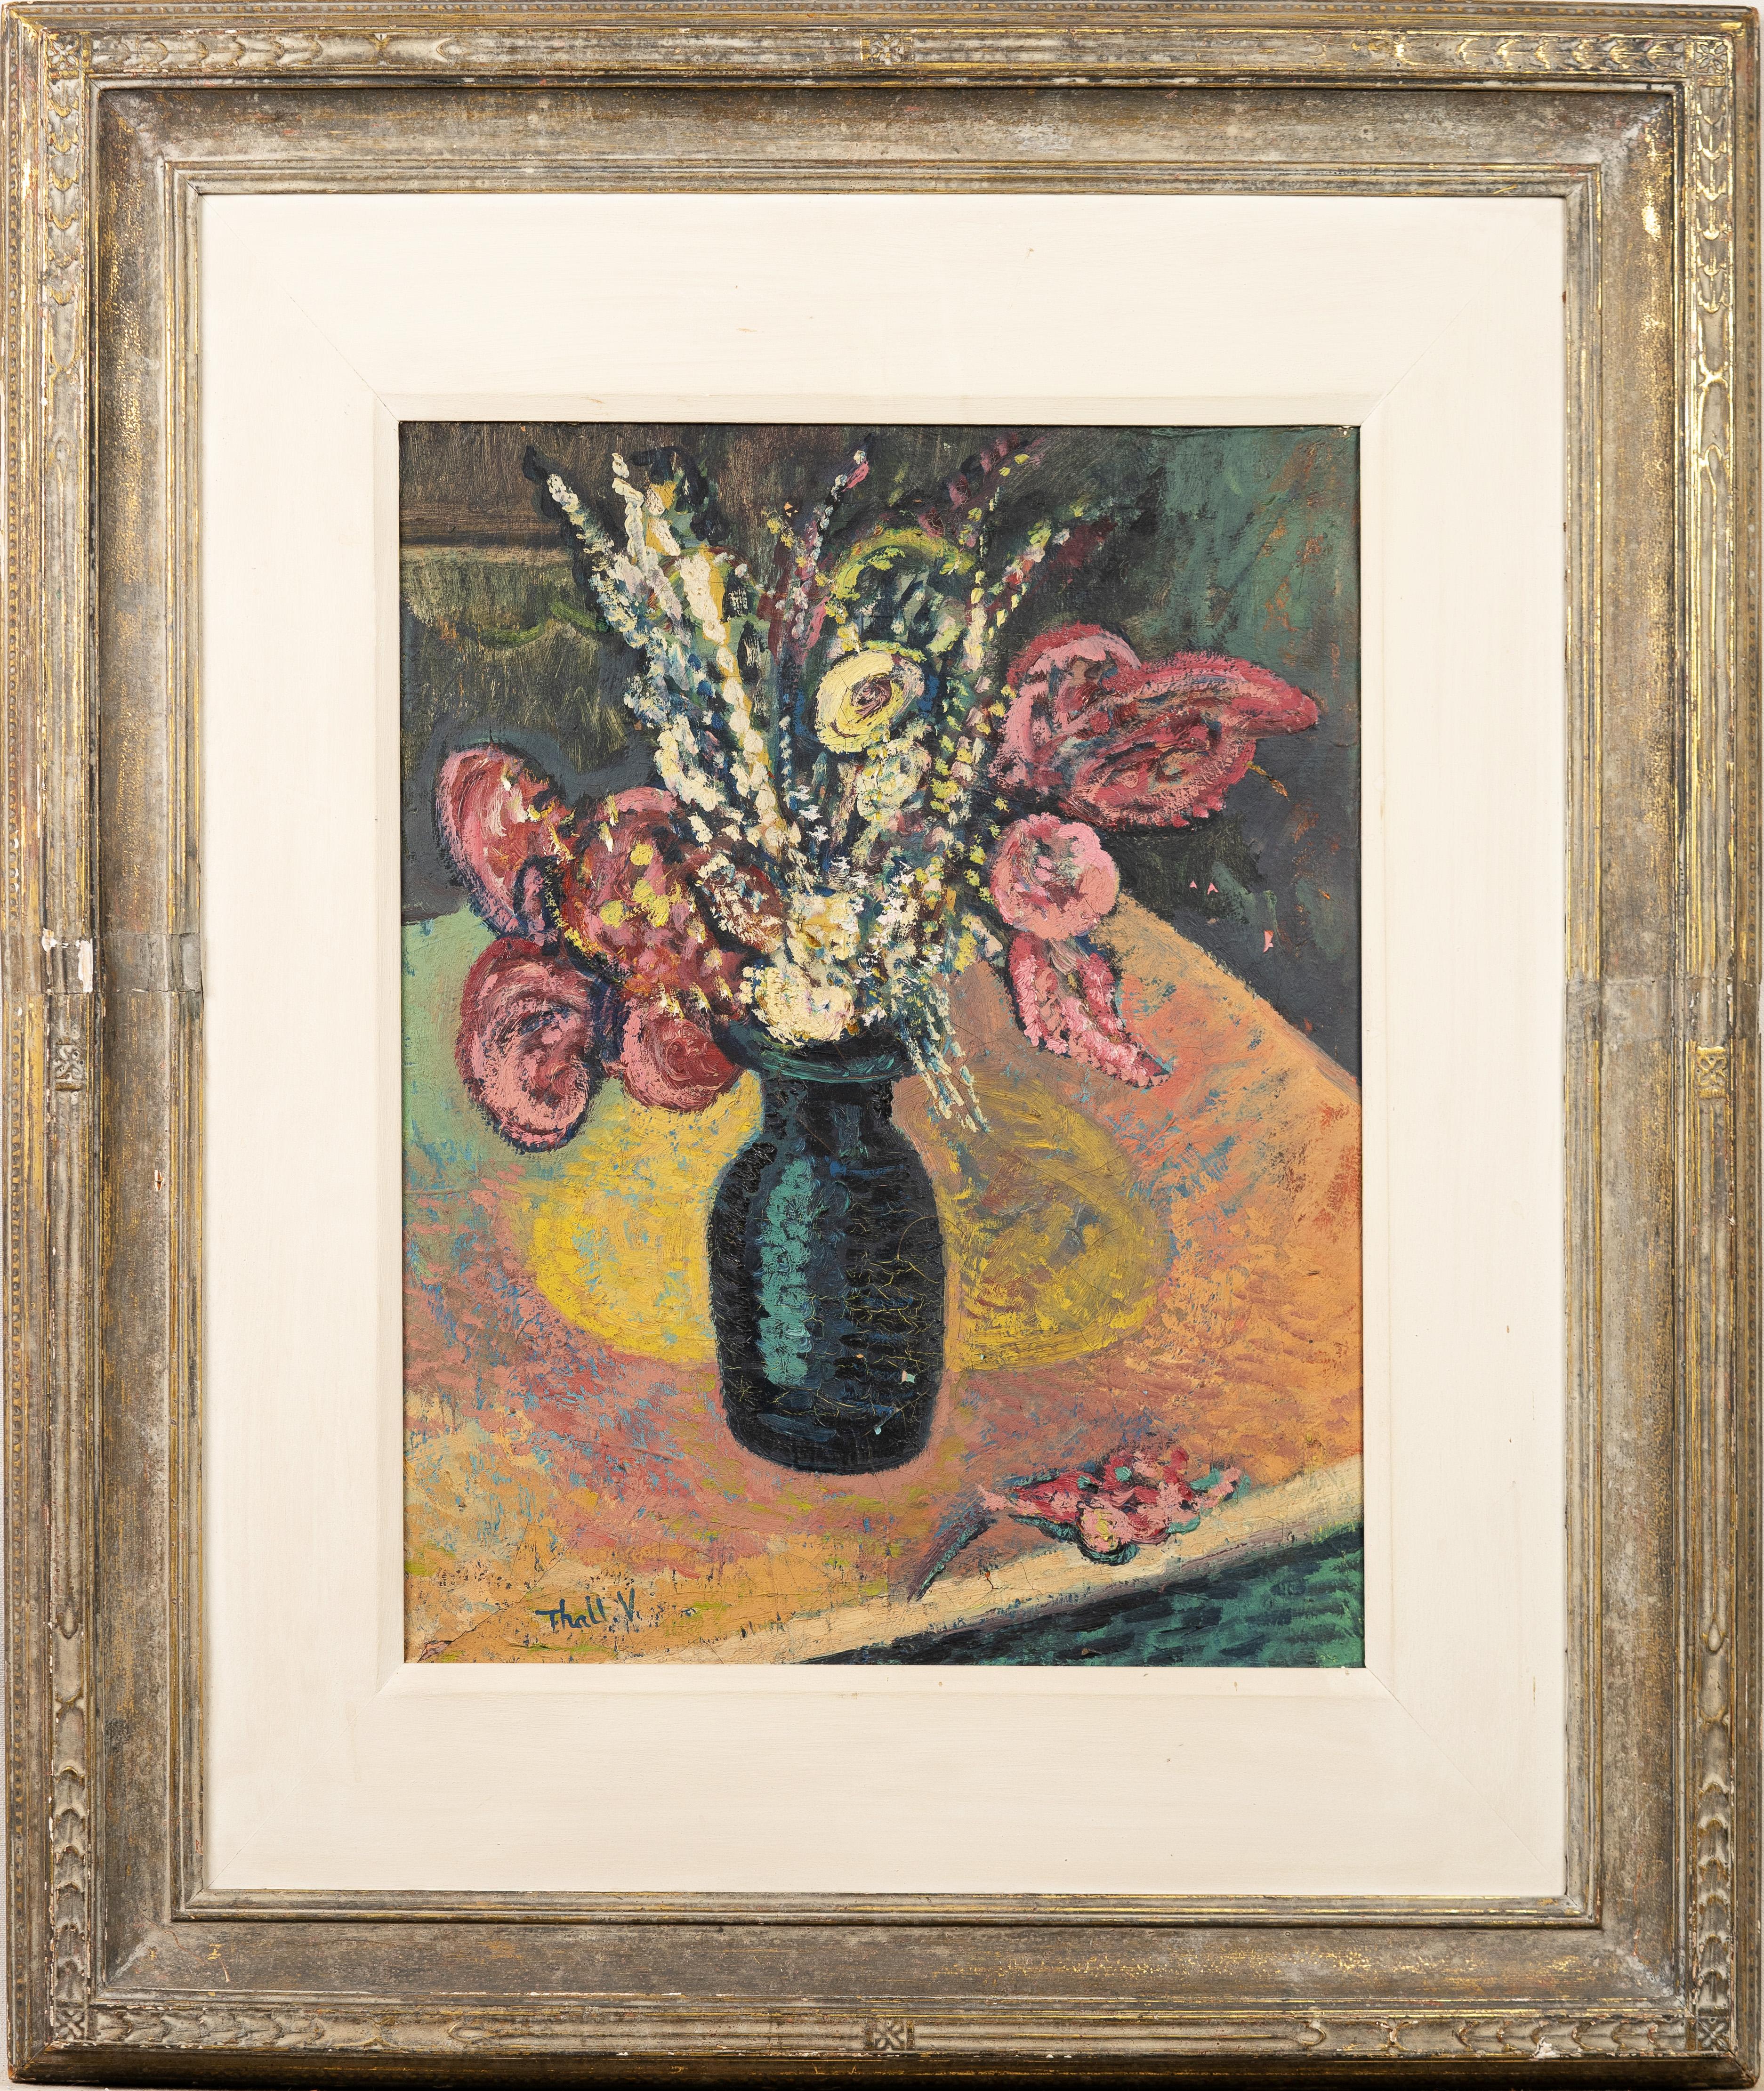 Antique American modernist still life oil painting by Victor Thall (American, 1902-1983).  Oil on canvas.  Framed in a very nice period American frame.  Great color and thick impast.  Signed.  